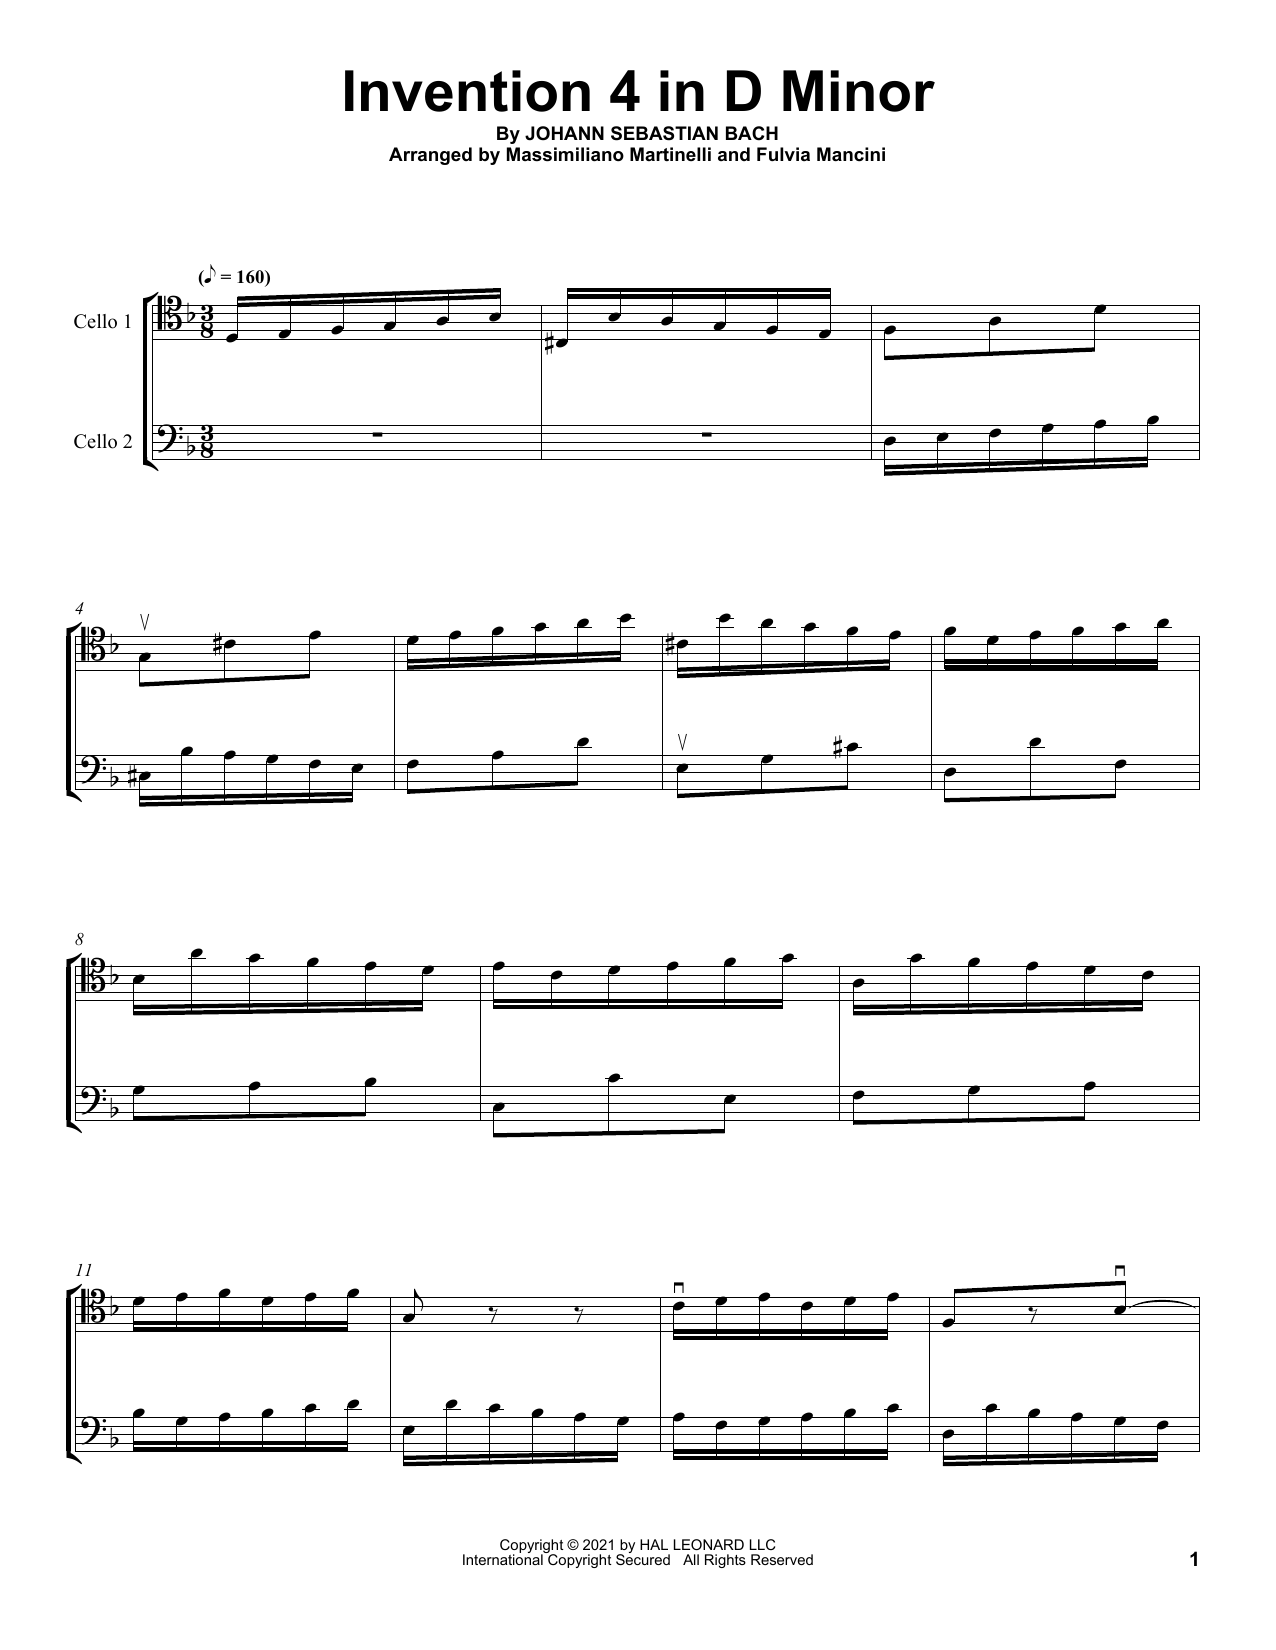 Download Mr & Mrs Cello Invention 4 In D Minor Sheet Music